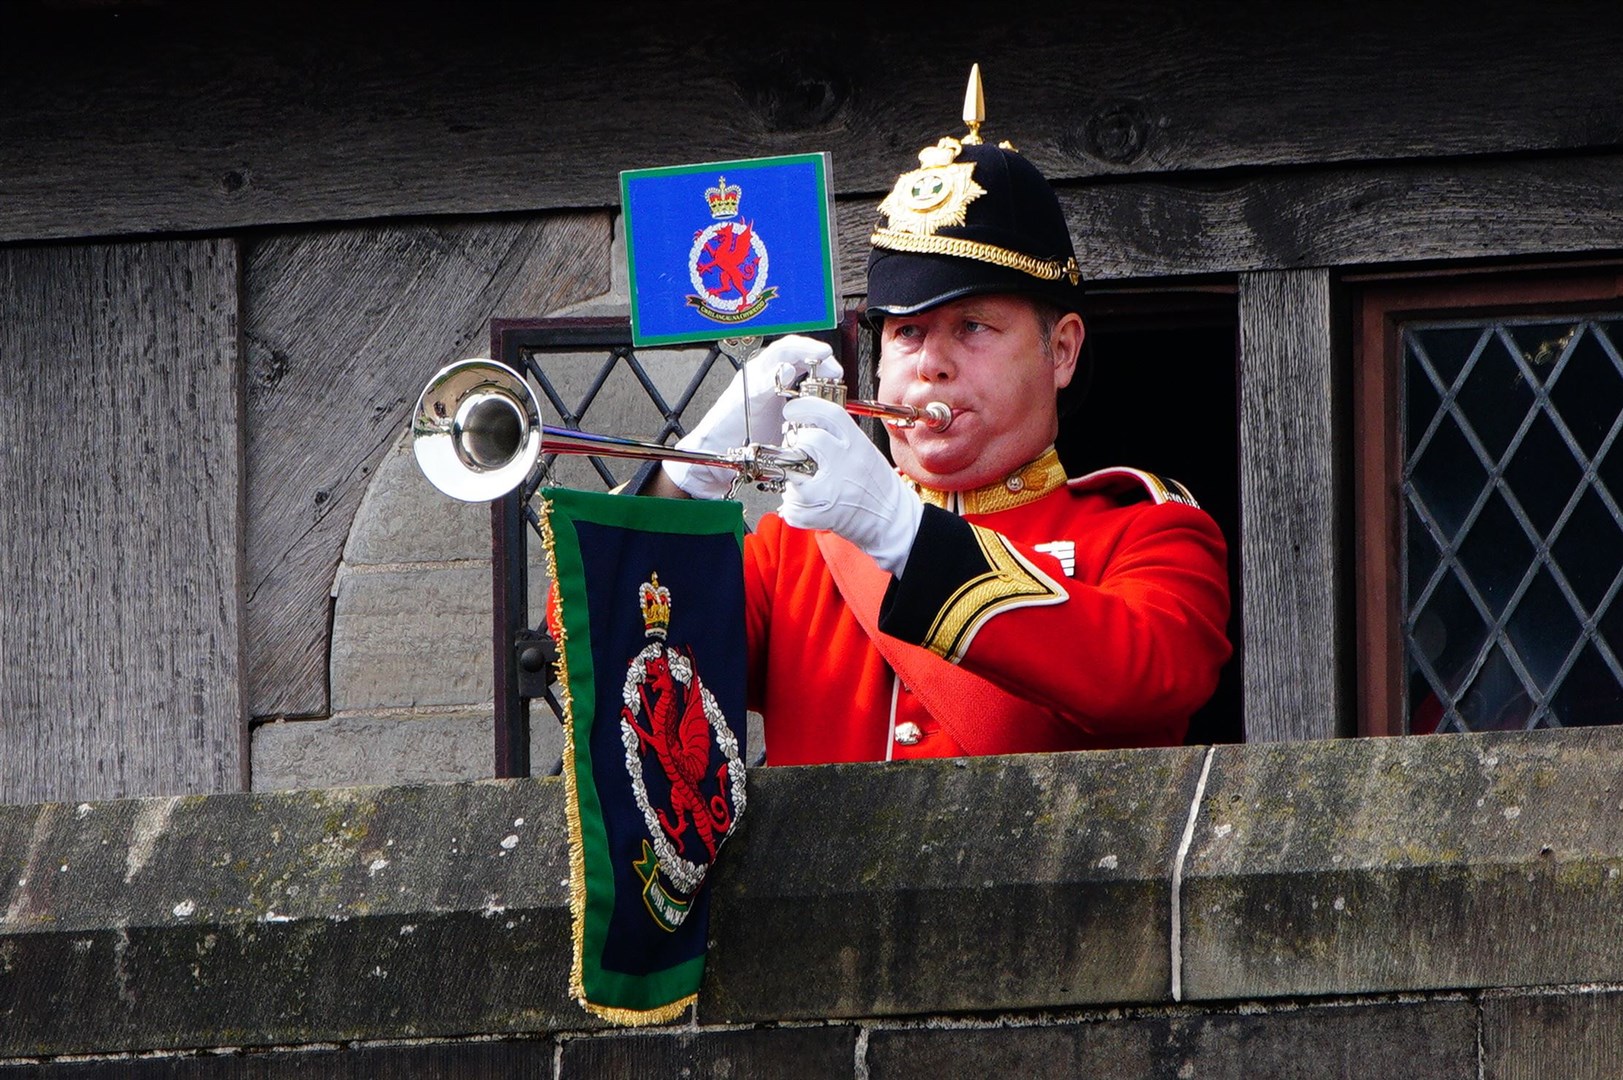 A trumpeteer sounds a fanfare during an Accession Proclamation Ceremony at Cardiff Castle, Wales (Ben Birchall/PA)